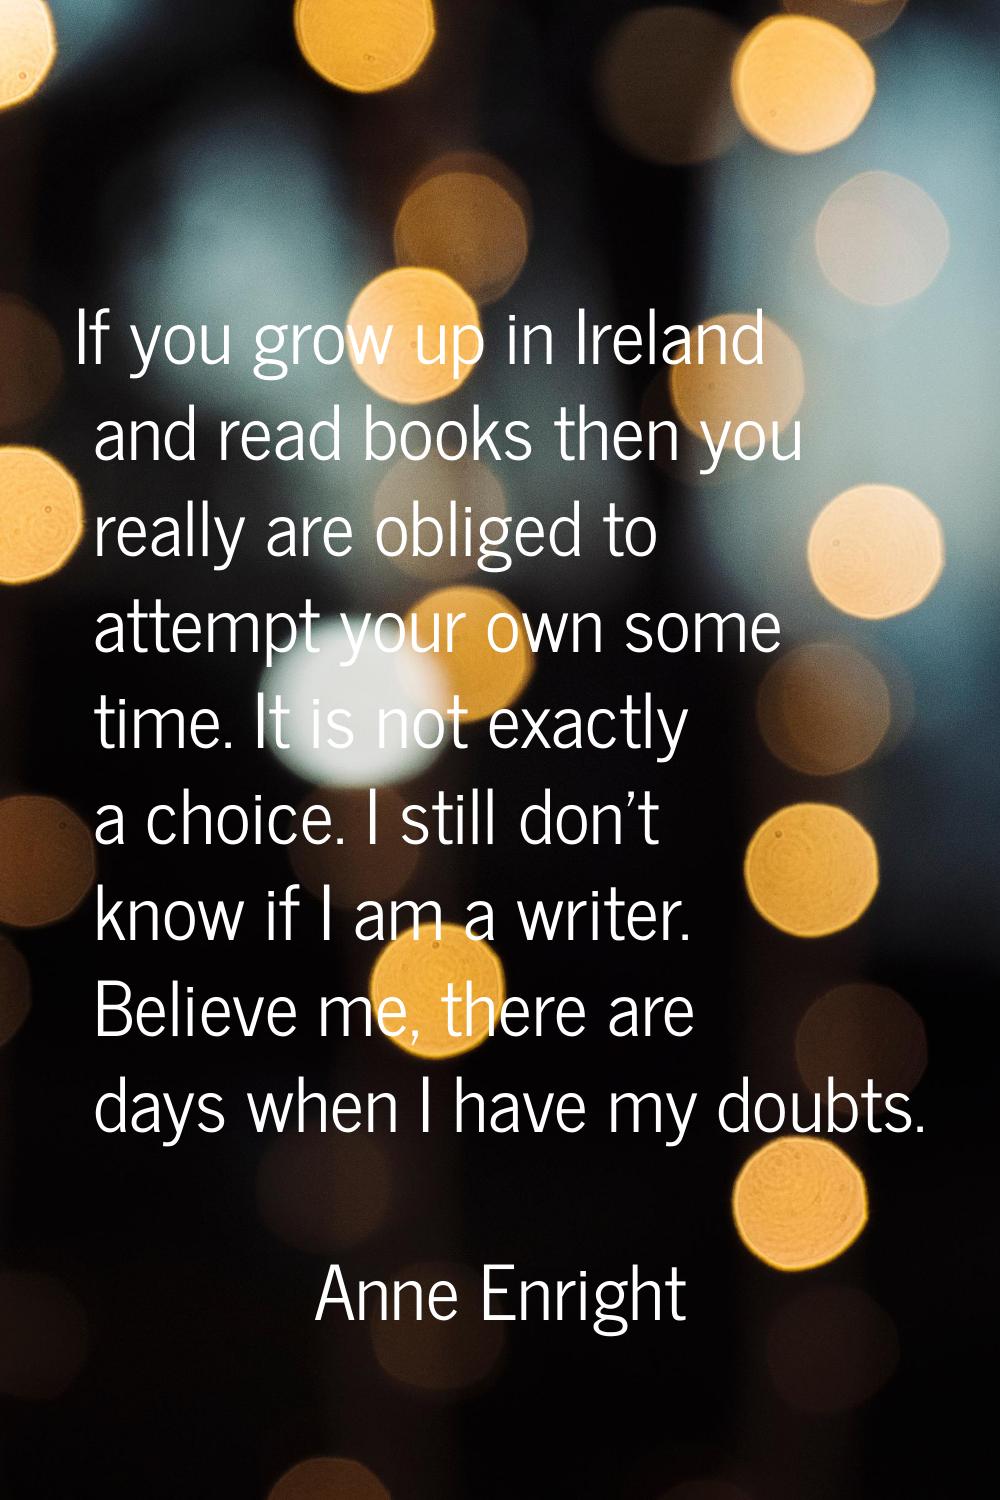 If you grow up in Ireland and read books then you really are obliged to attempt your own some time.